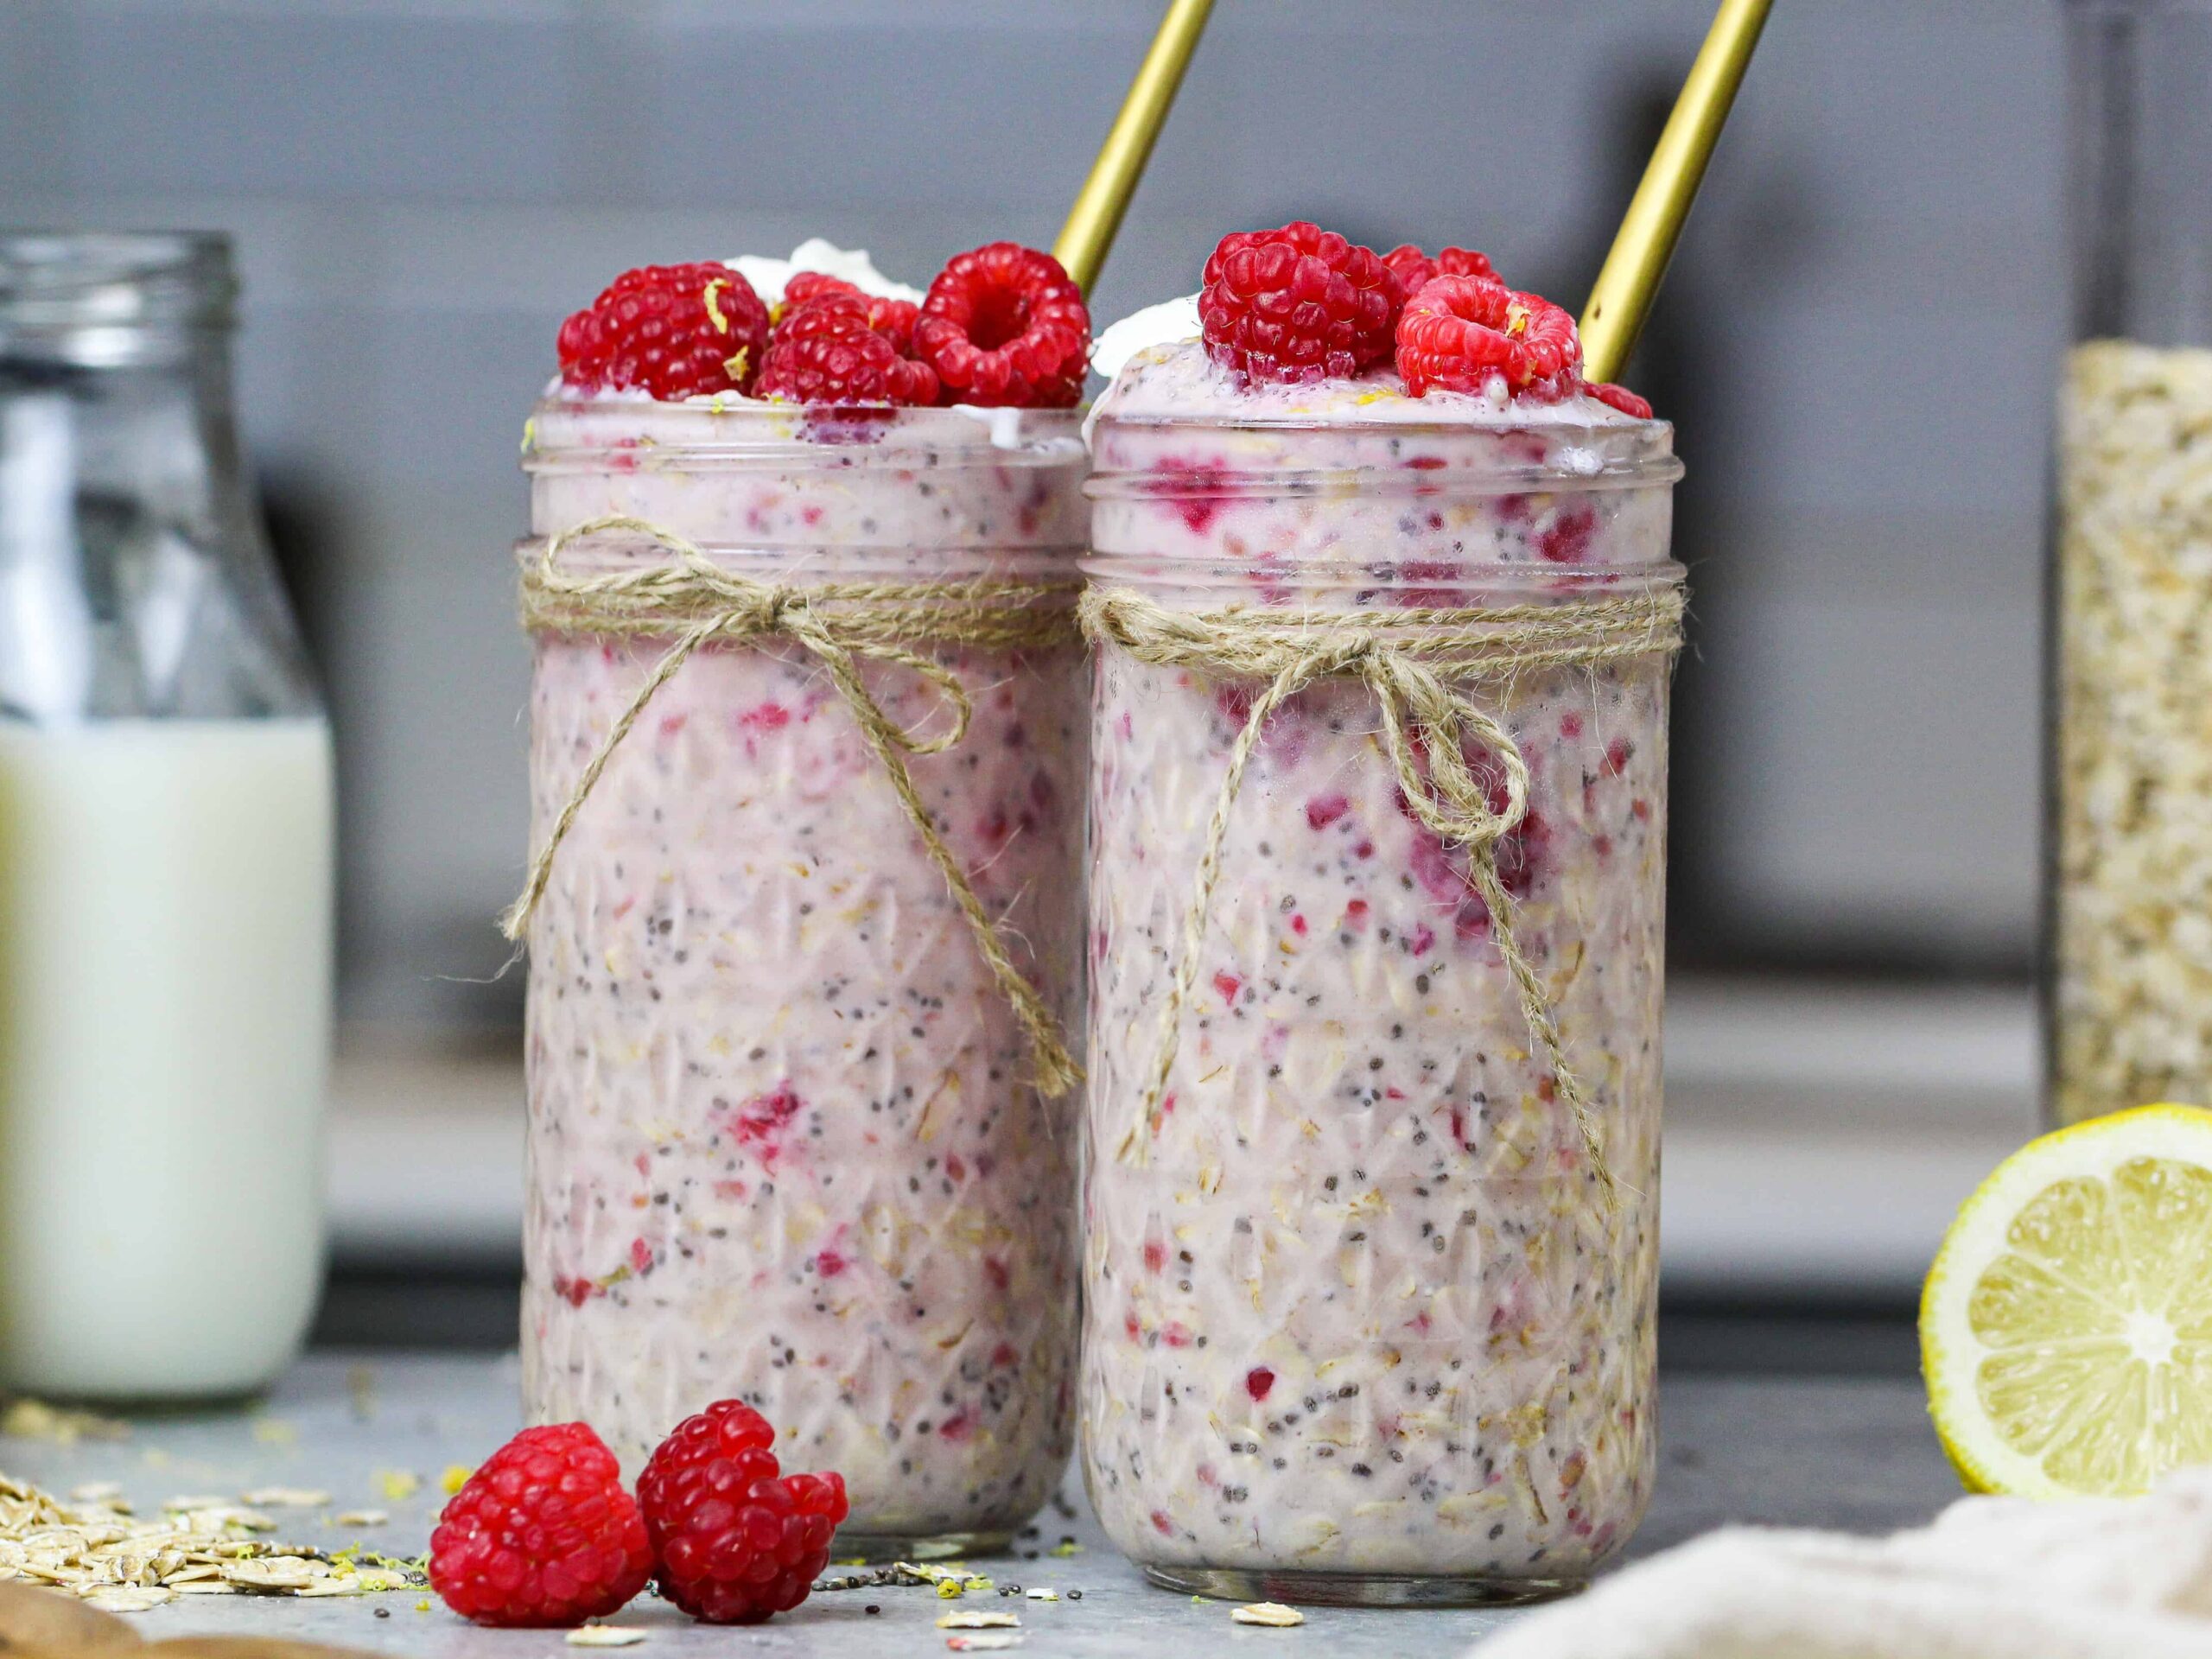 image of raspberry overnight oats that have been made in advance and are ready to be eaten the next day